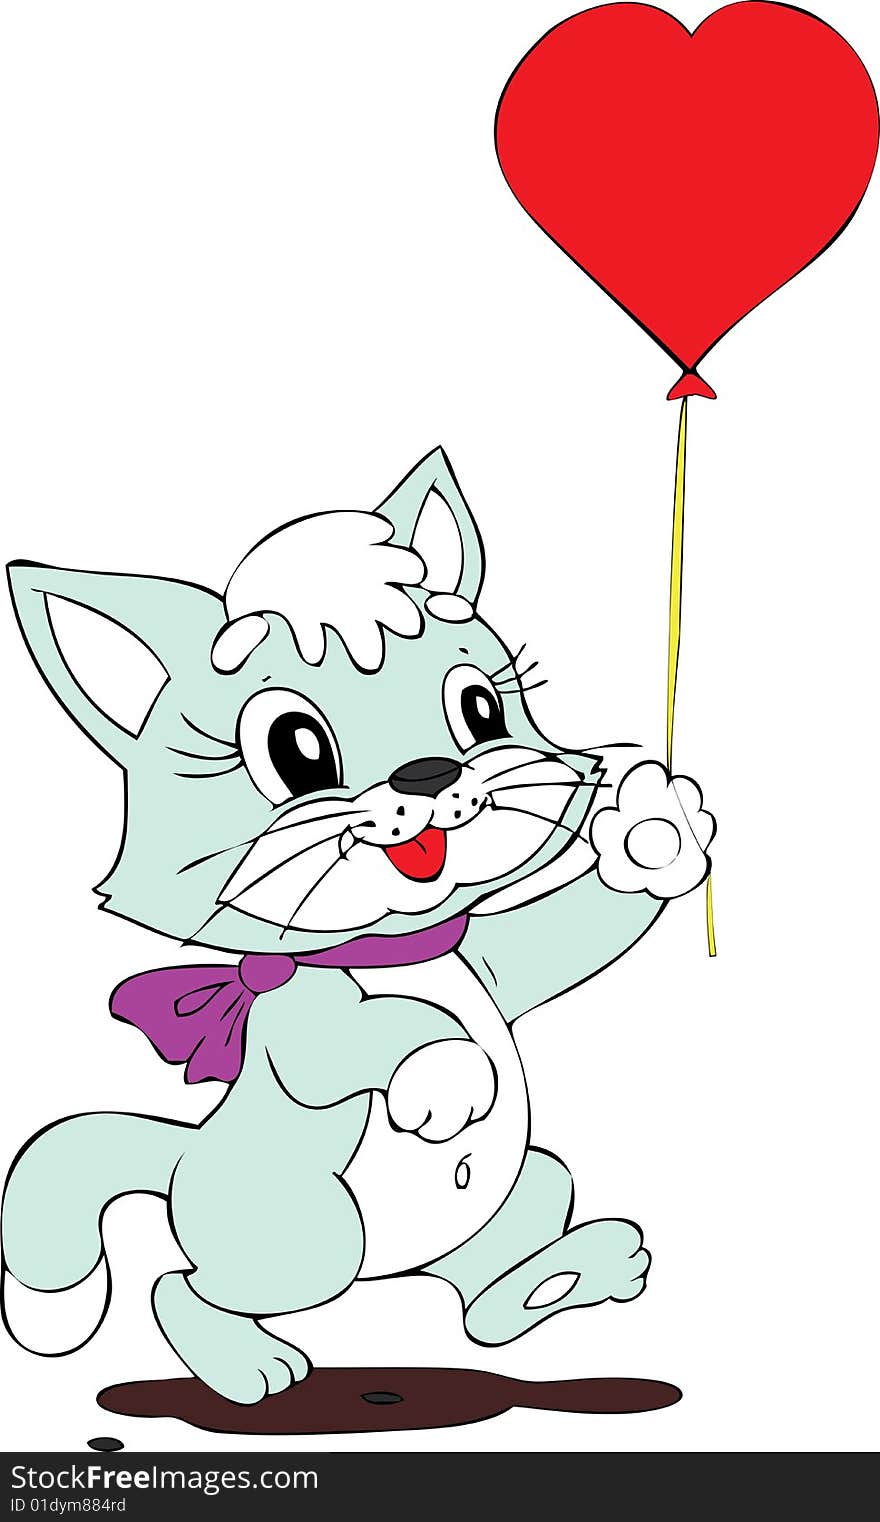 Illustration of the amusing cat with small ball. Illustration of the amusing cat with small ball